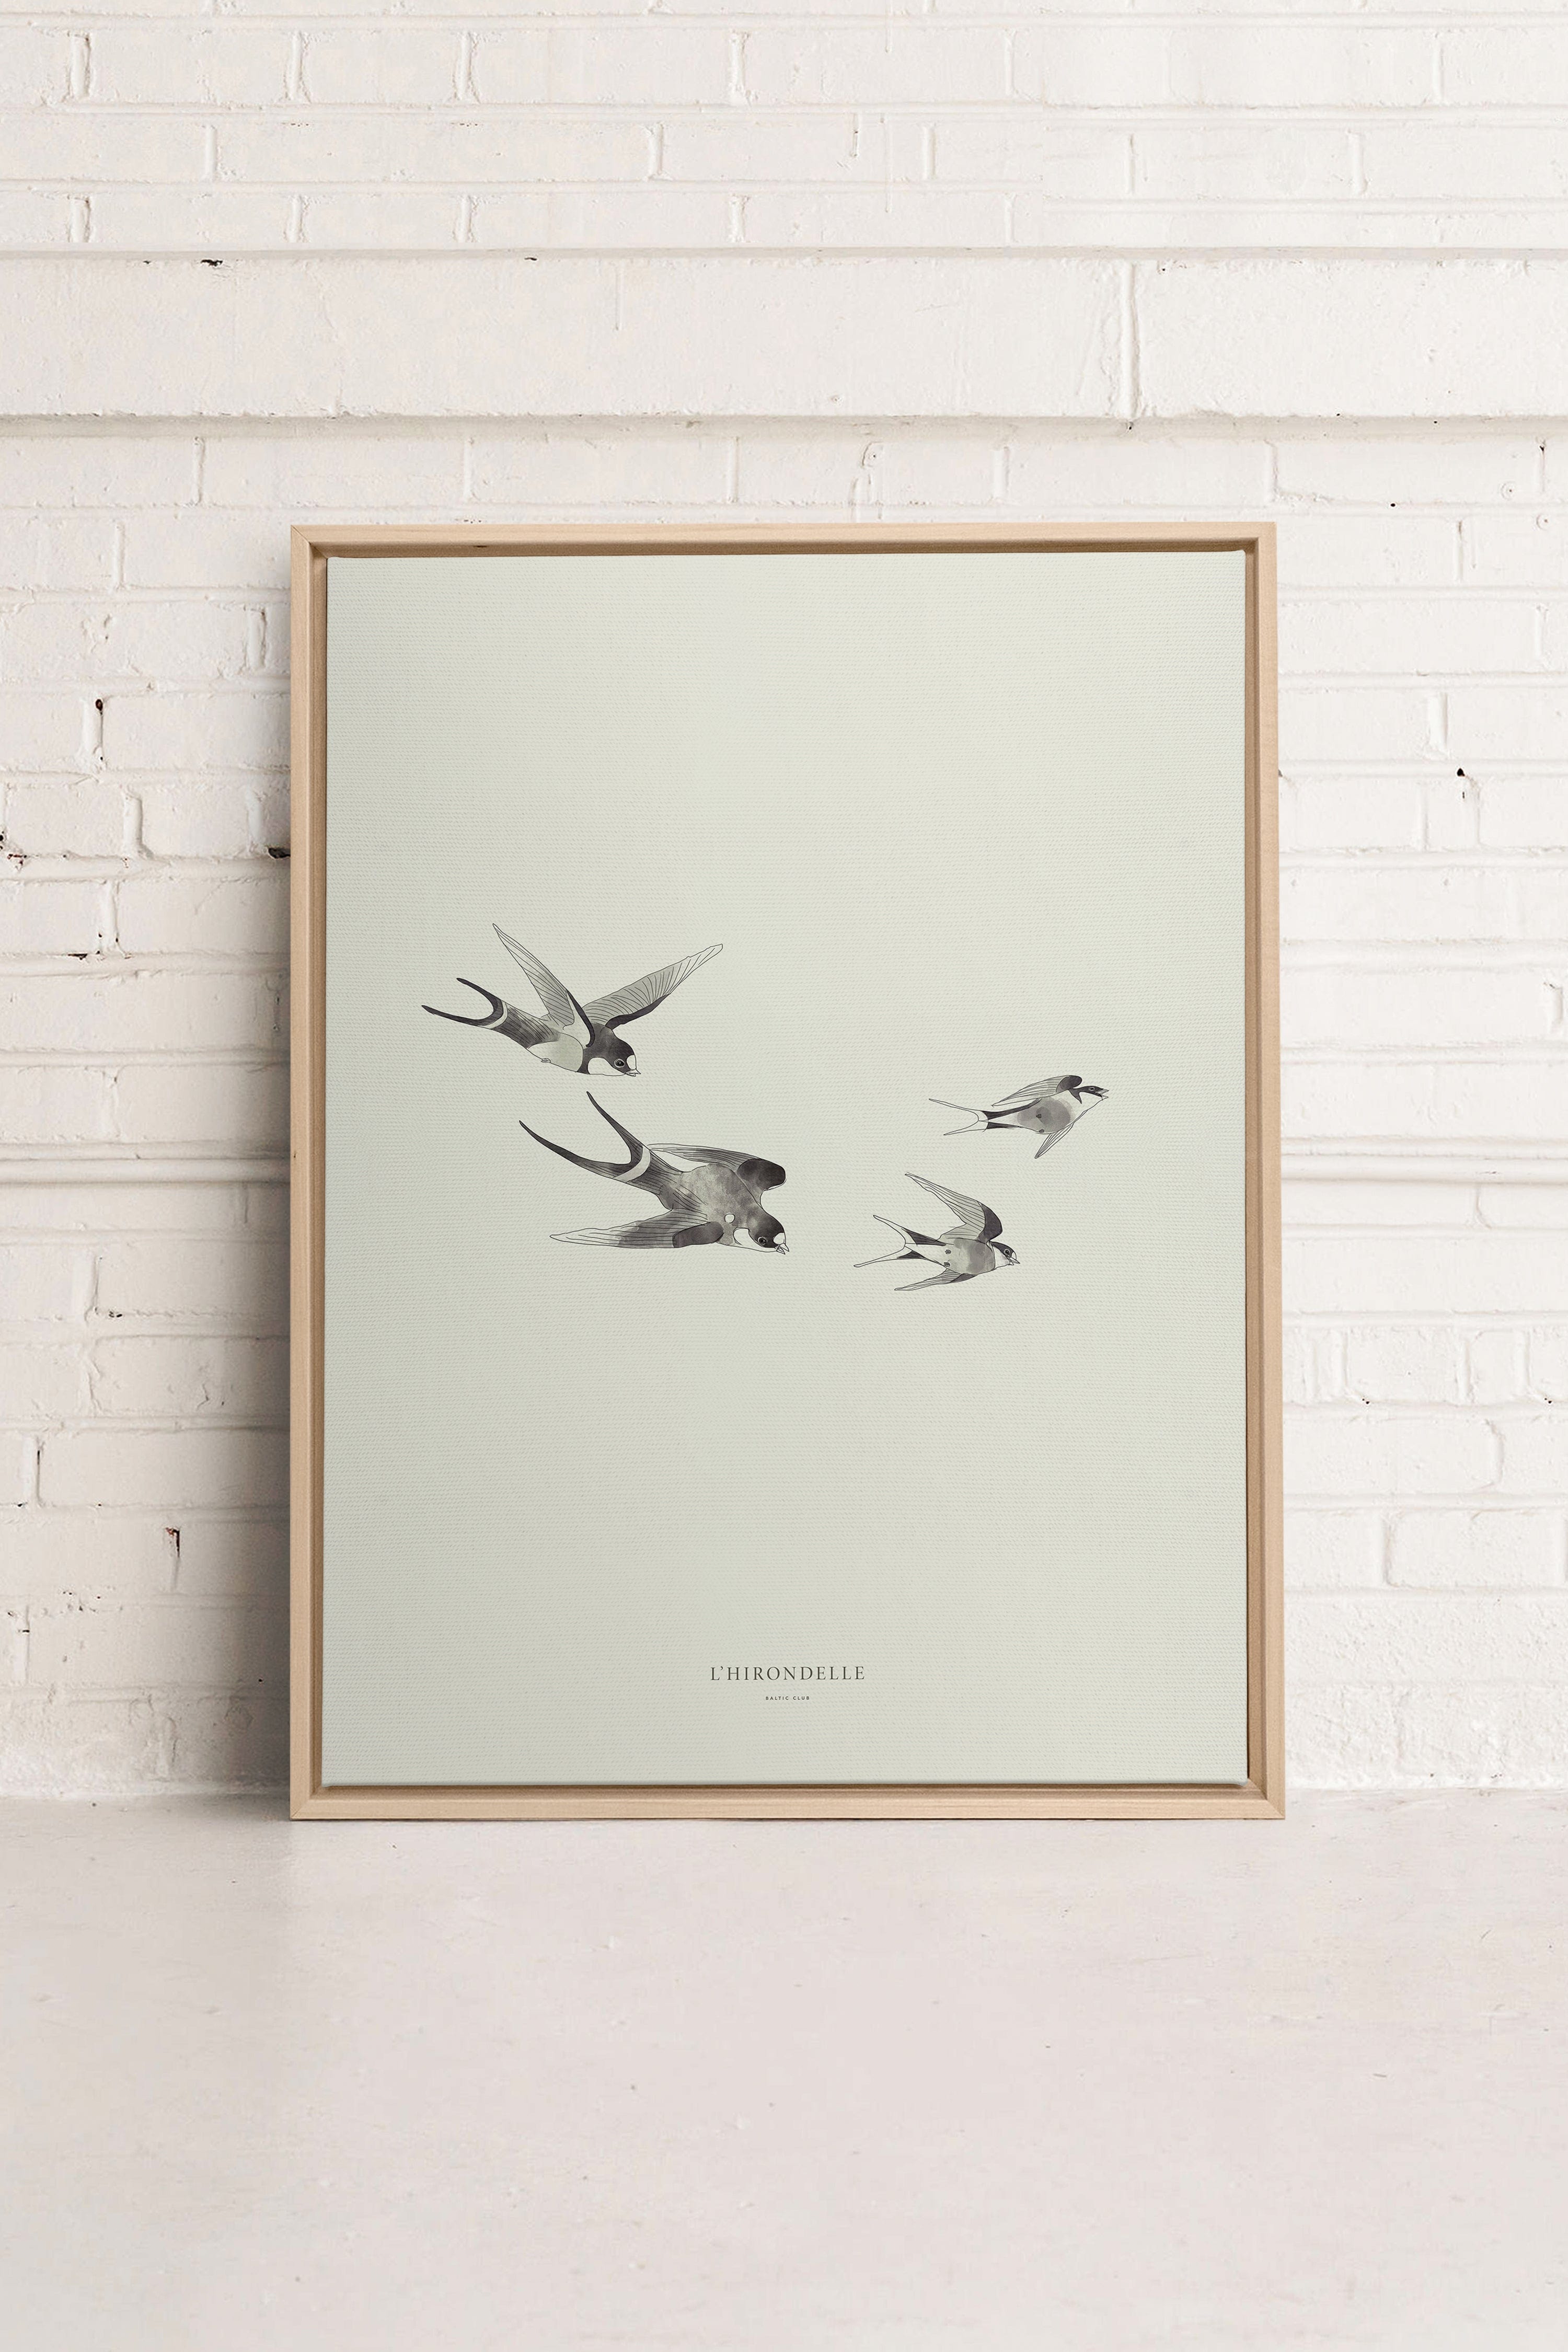 Swallow - Printed illustration on canvas